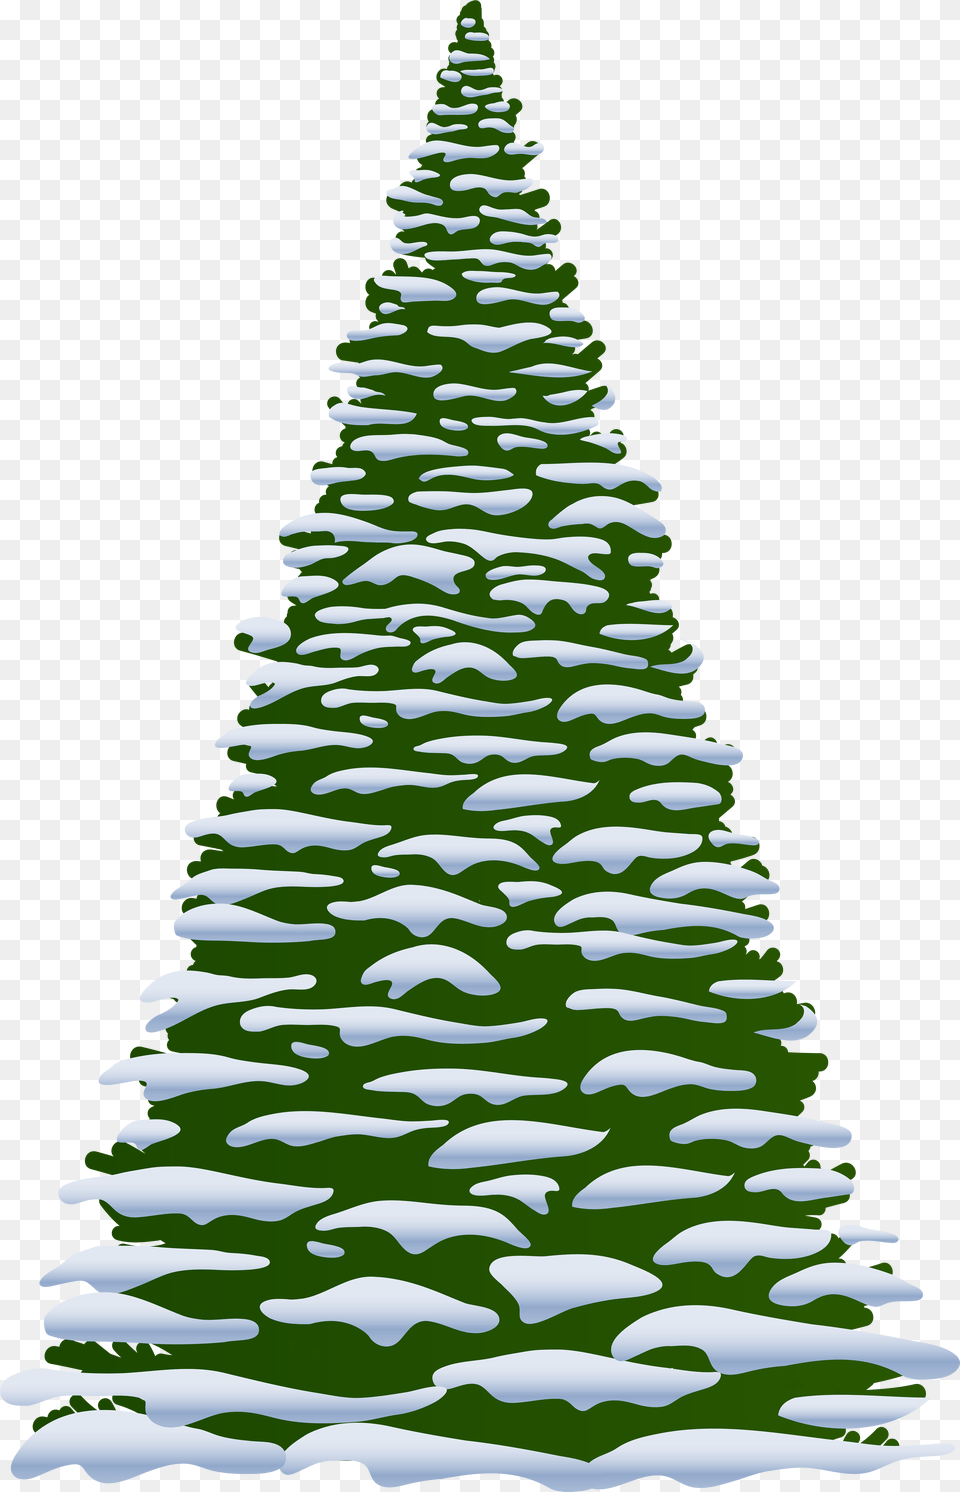 Fir Tree Clipart Oregon Tree Christmas Tree With Snow Clipart, Plant, Christmas Decorations, Festival, Christmas Tree Png